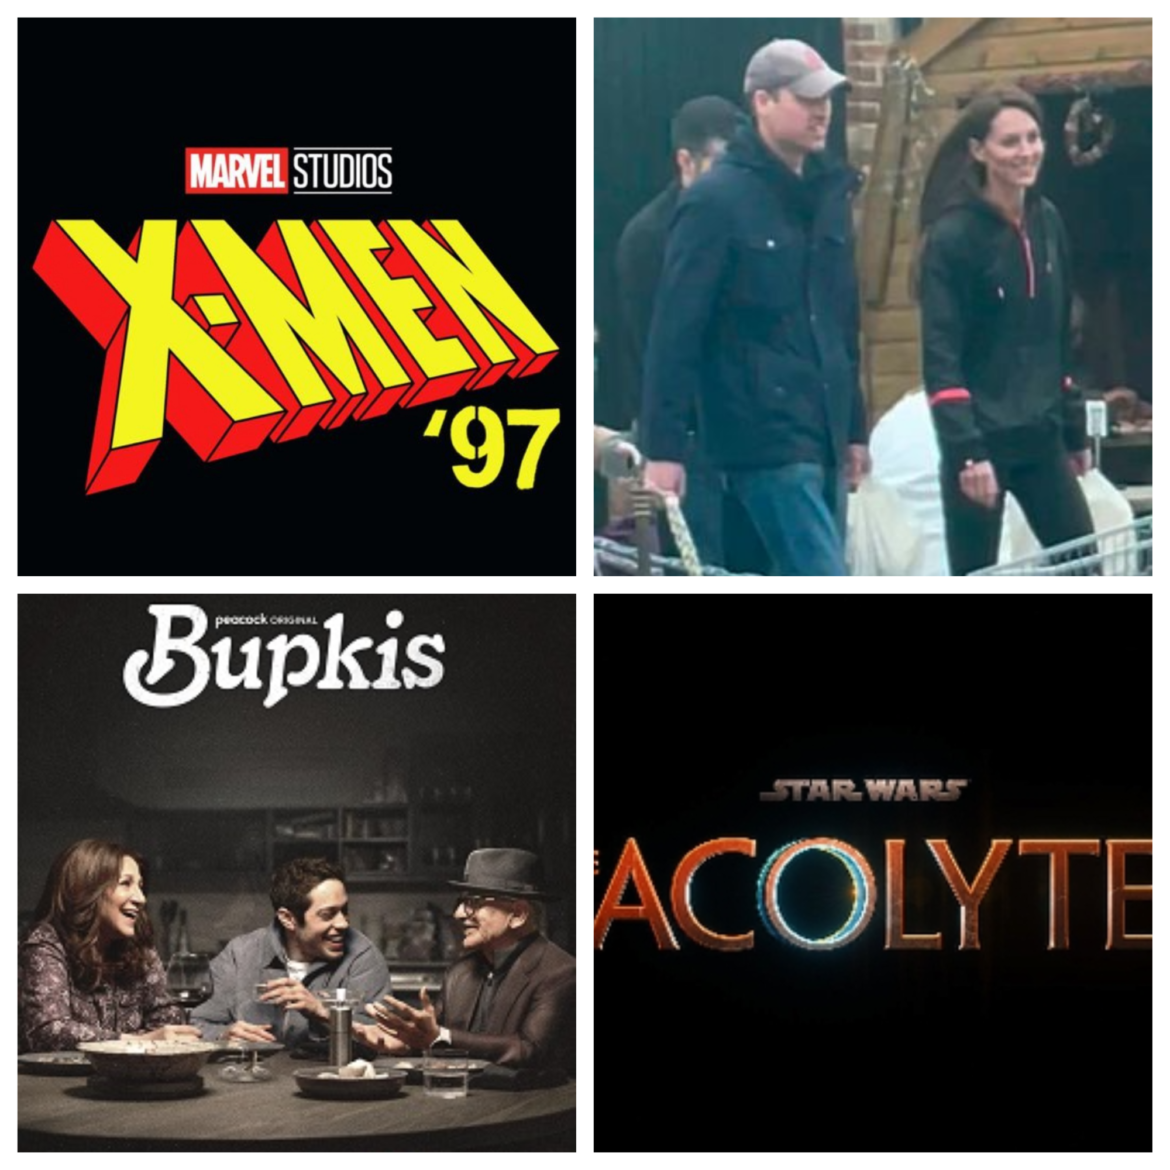 West Week Ever: Pop Culture In Review 3/22/24